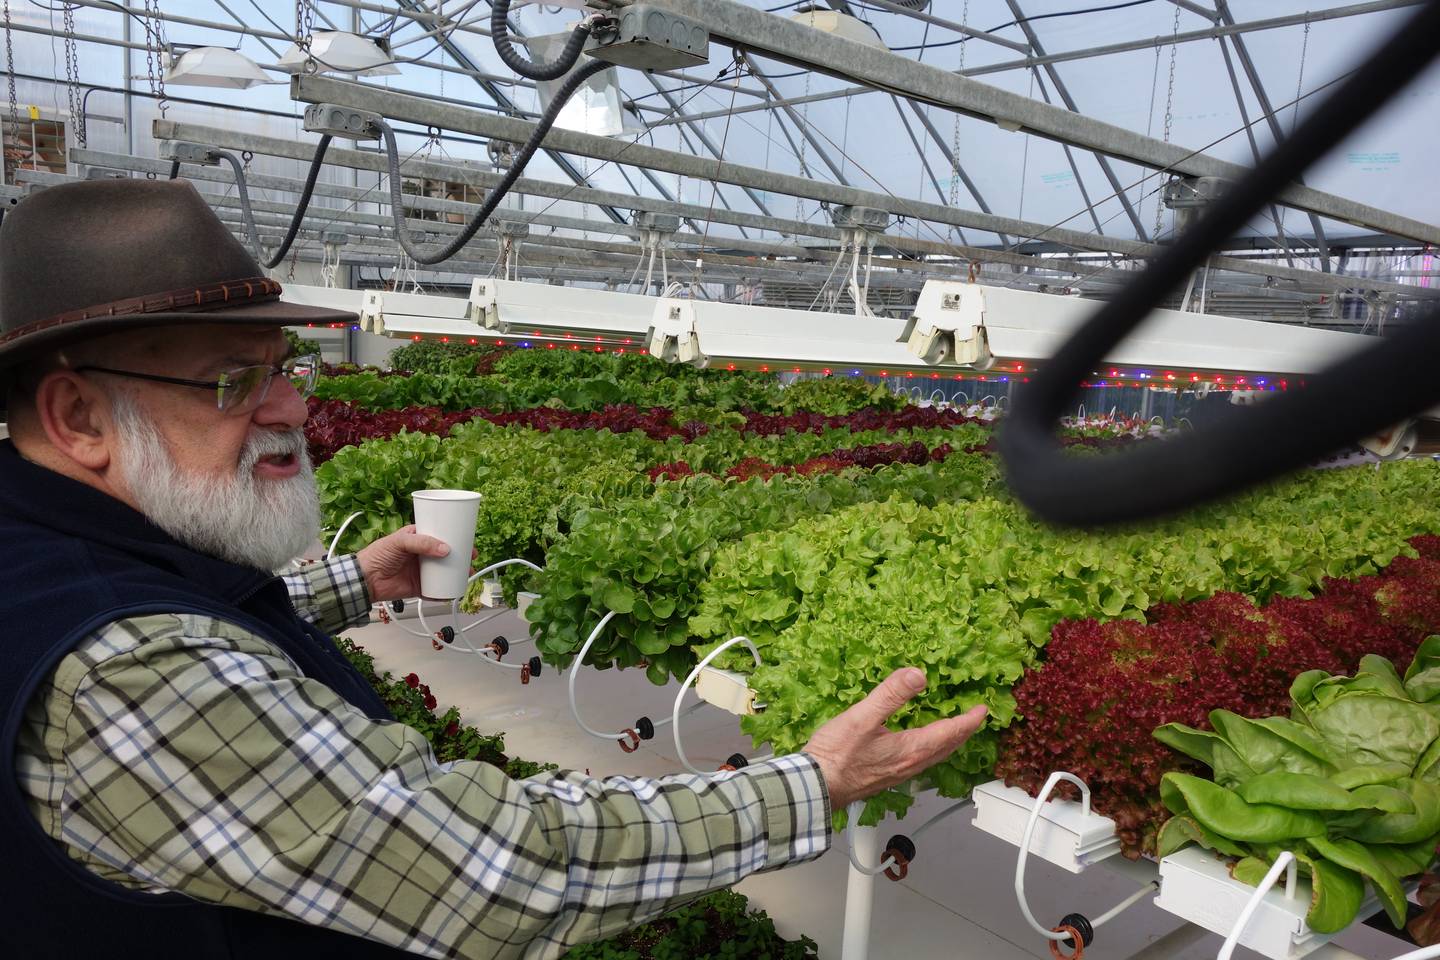 Chena Hot Springs Resort owner Bernie Karl shows off some of the produce in his greenhouse.